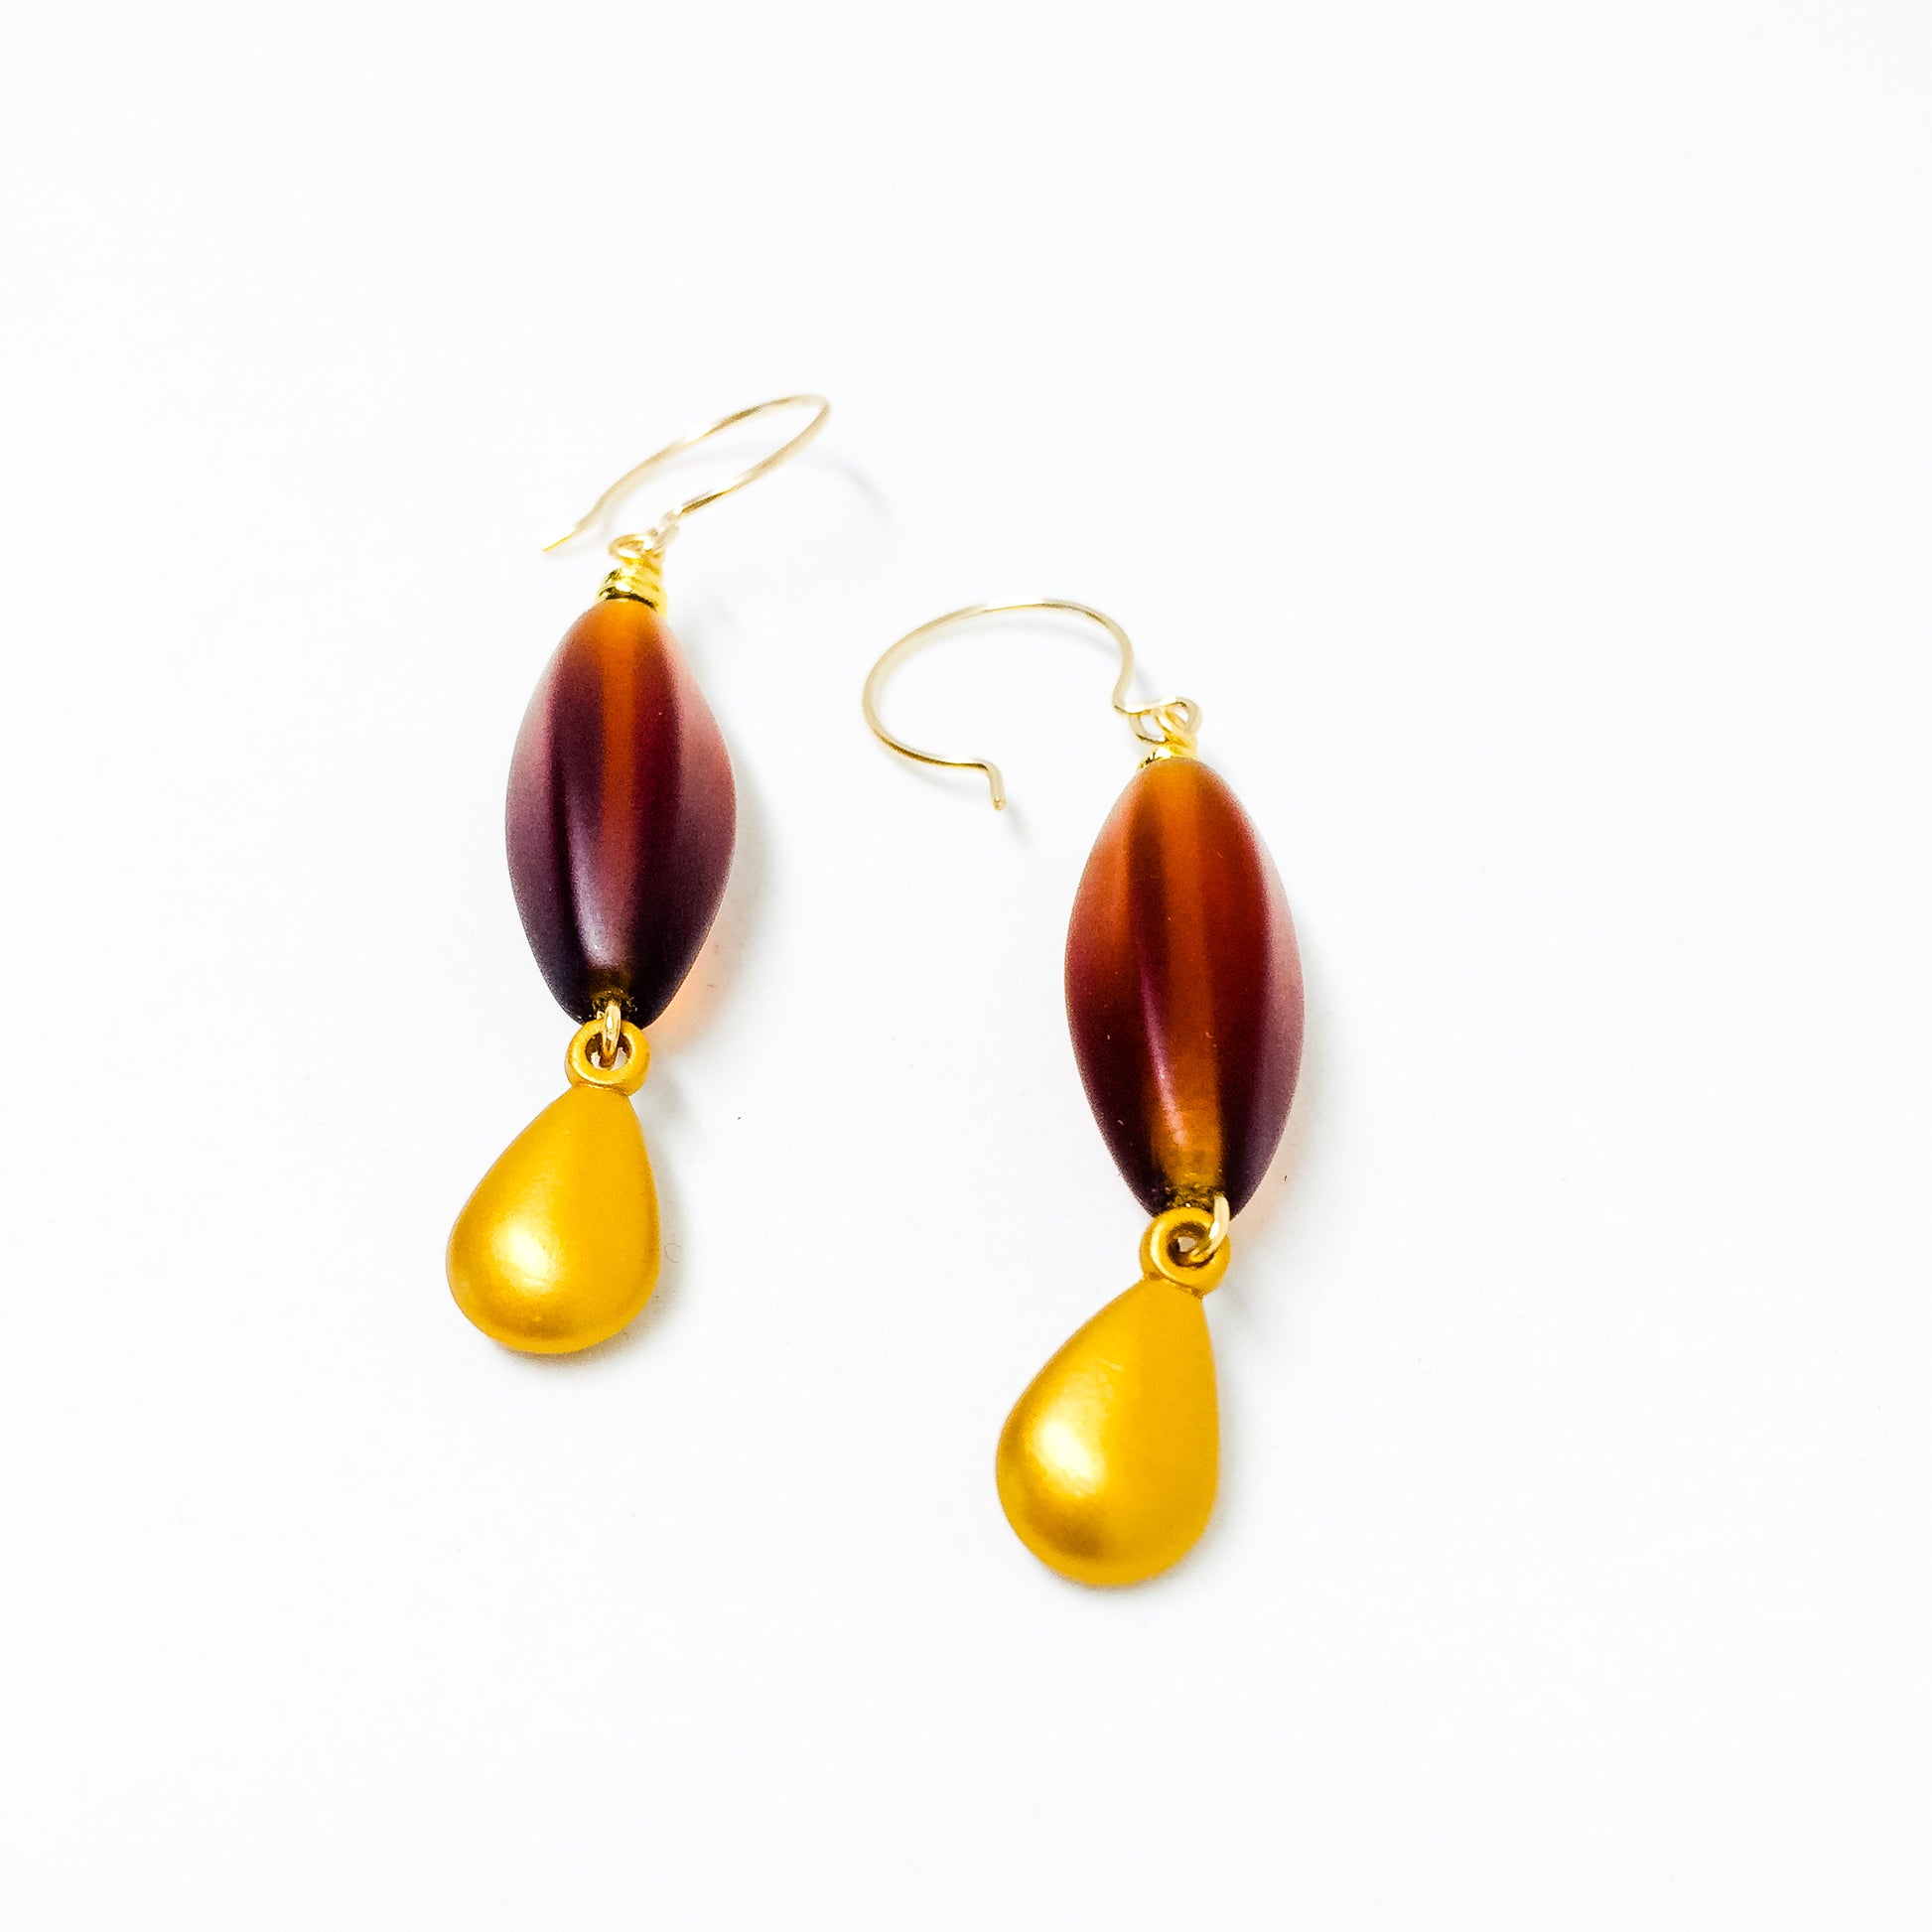 Amber frosted Czech glass bead drop earrings with gold charm